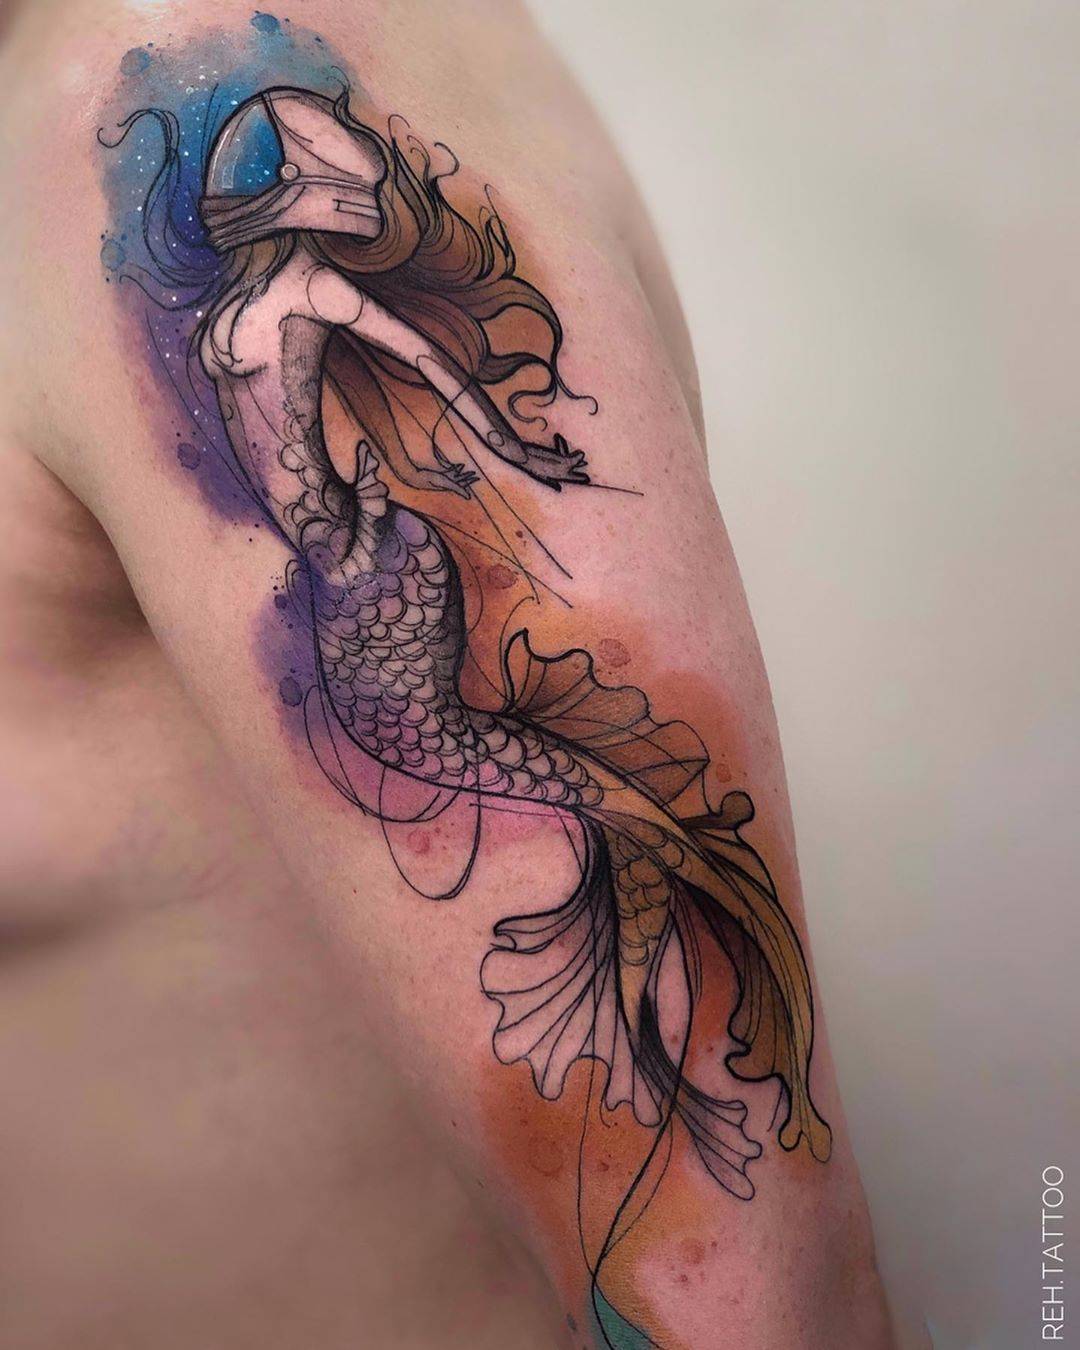 All About Watercolor Tattoos History Characteristics Design Ideas   CTMtattoo